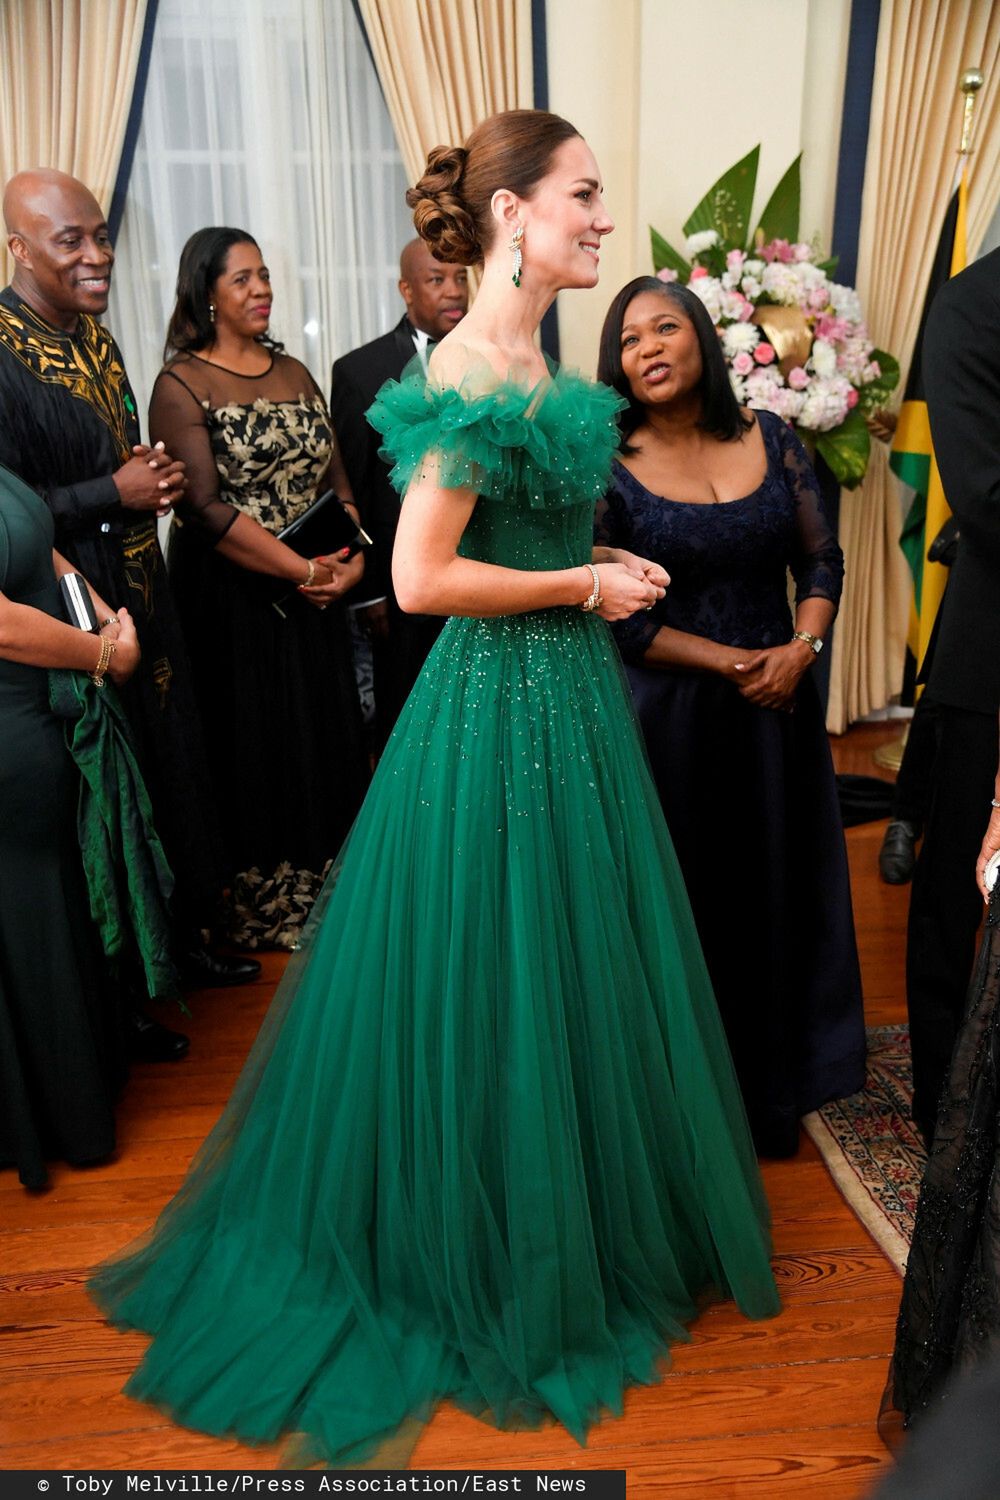 The Duchess of Cambridge speaks with guests during a dinner hosted by Patrick Allen, Governor General of Jamaica, at King's House, in Kingston, Jamaica, on day five of the royal tour of the Caribbean on behalf of the Queen to mark her Platinum Jubilee. Picture date: Wednesday March 23, 2022.